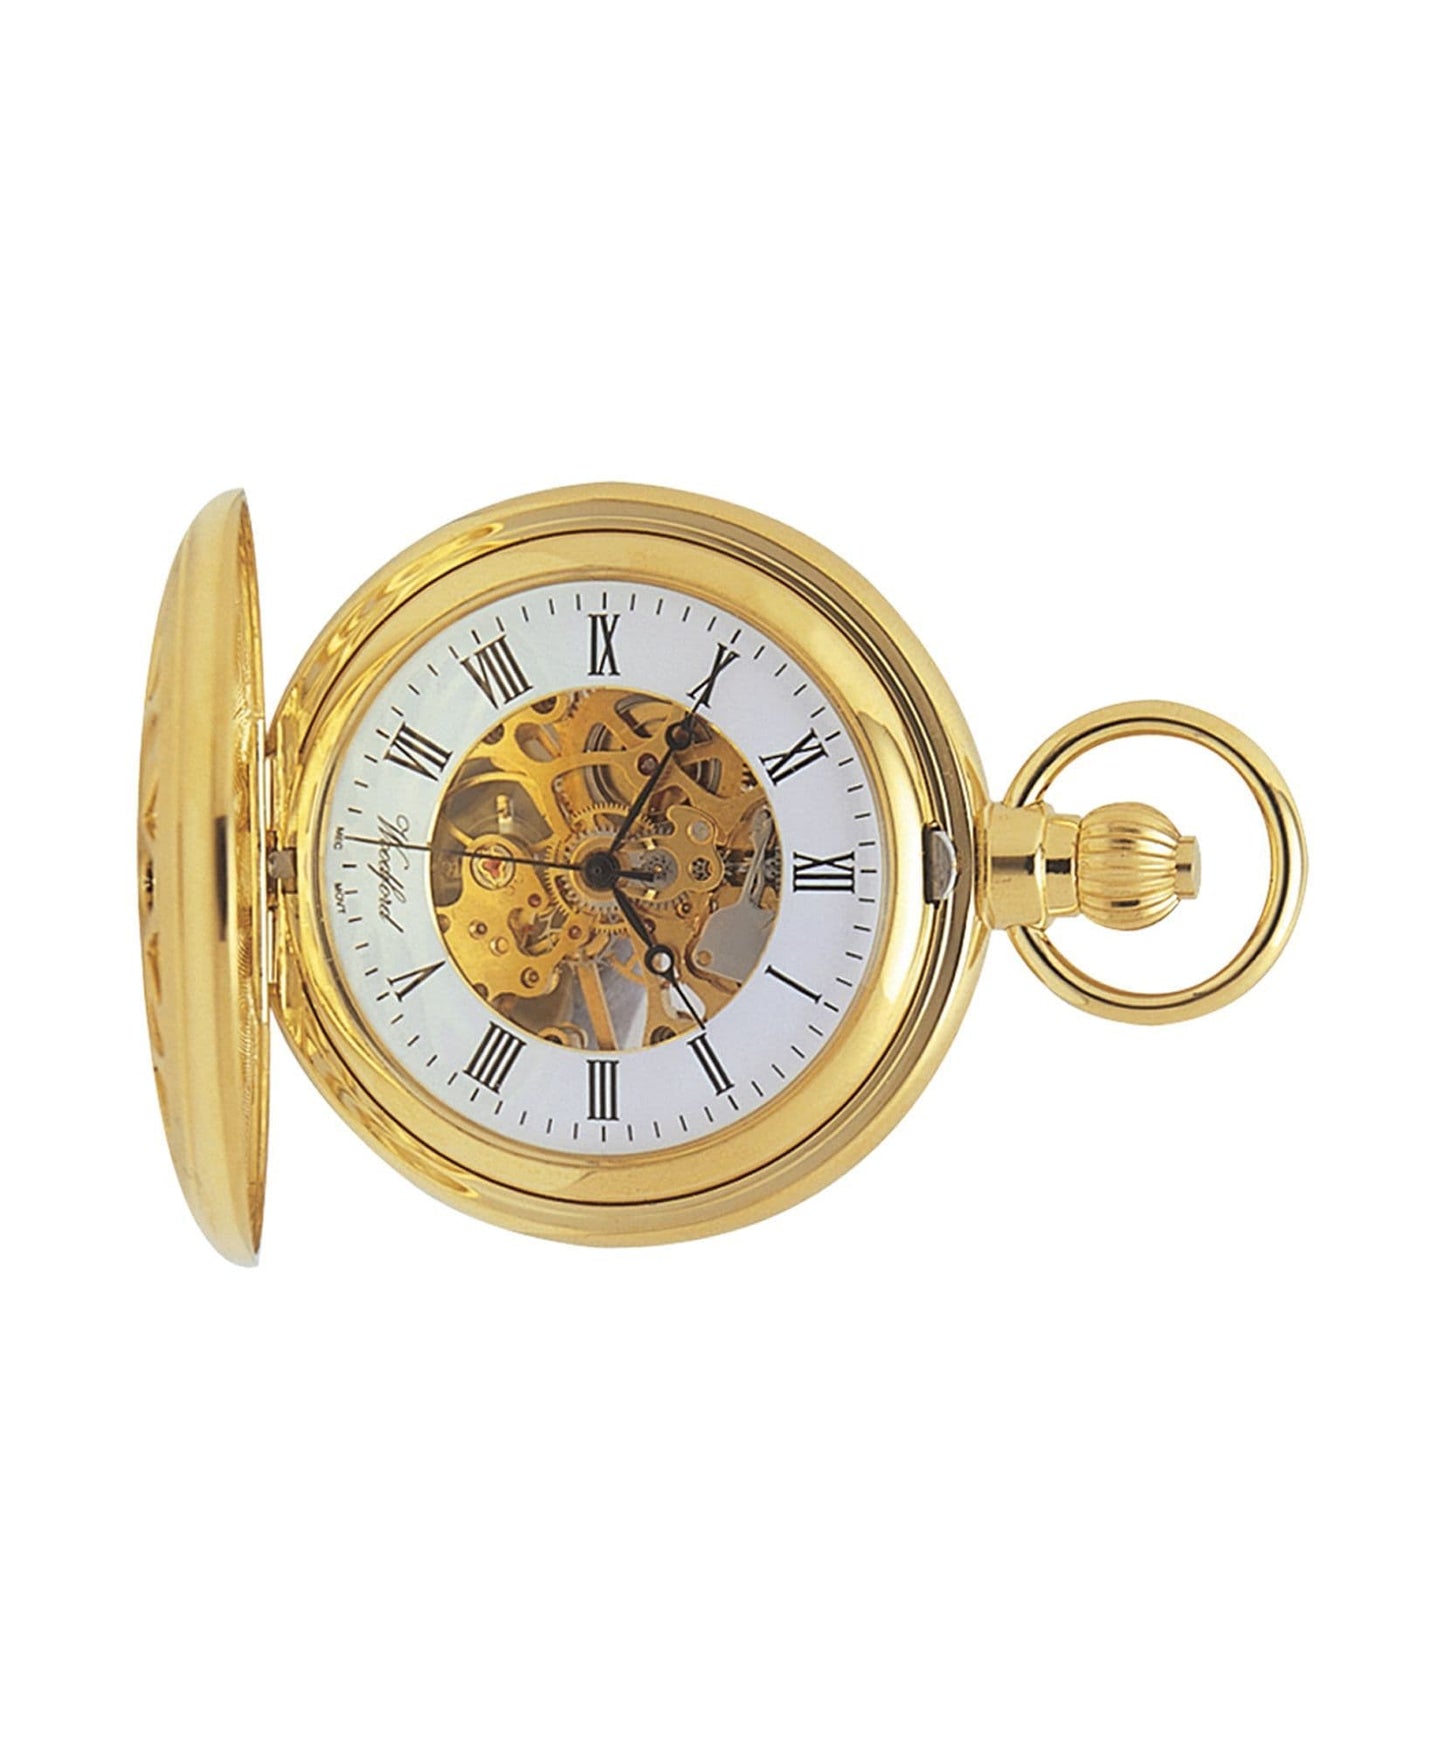 Mechanical Gold Plated Patterned Half Hunter Pocket Watch With Chain